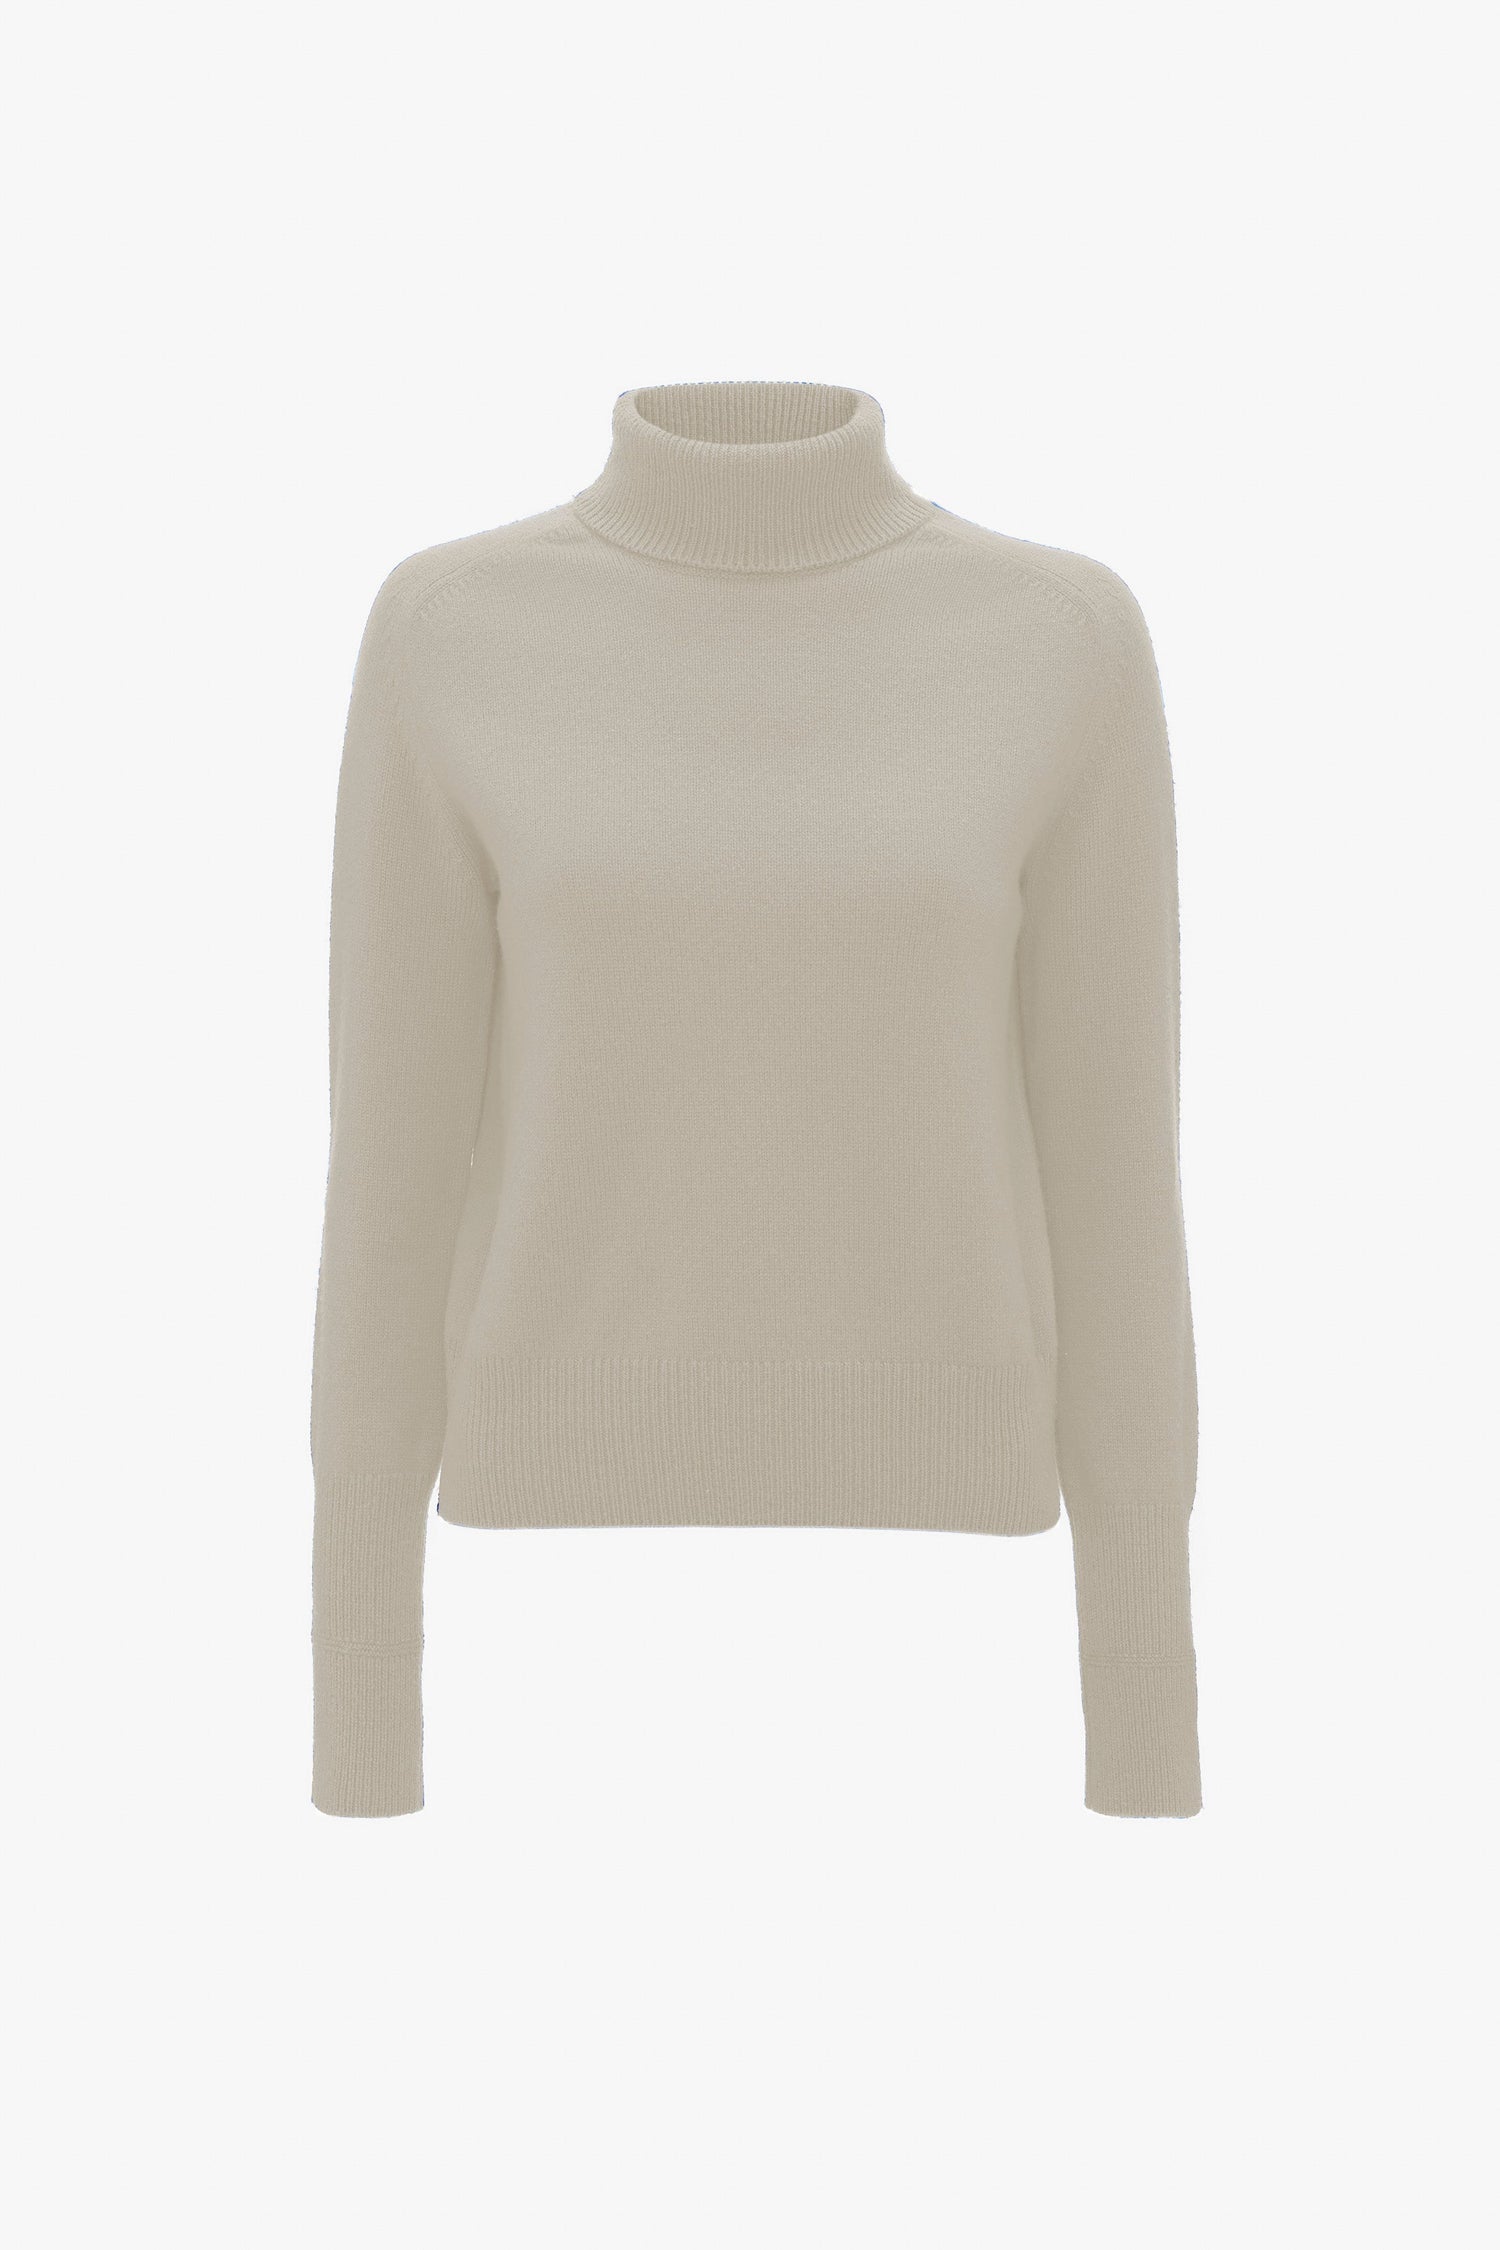 A Victoria Beckham Polo Neck Jumper In Ivory displayed on a white background.